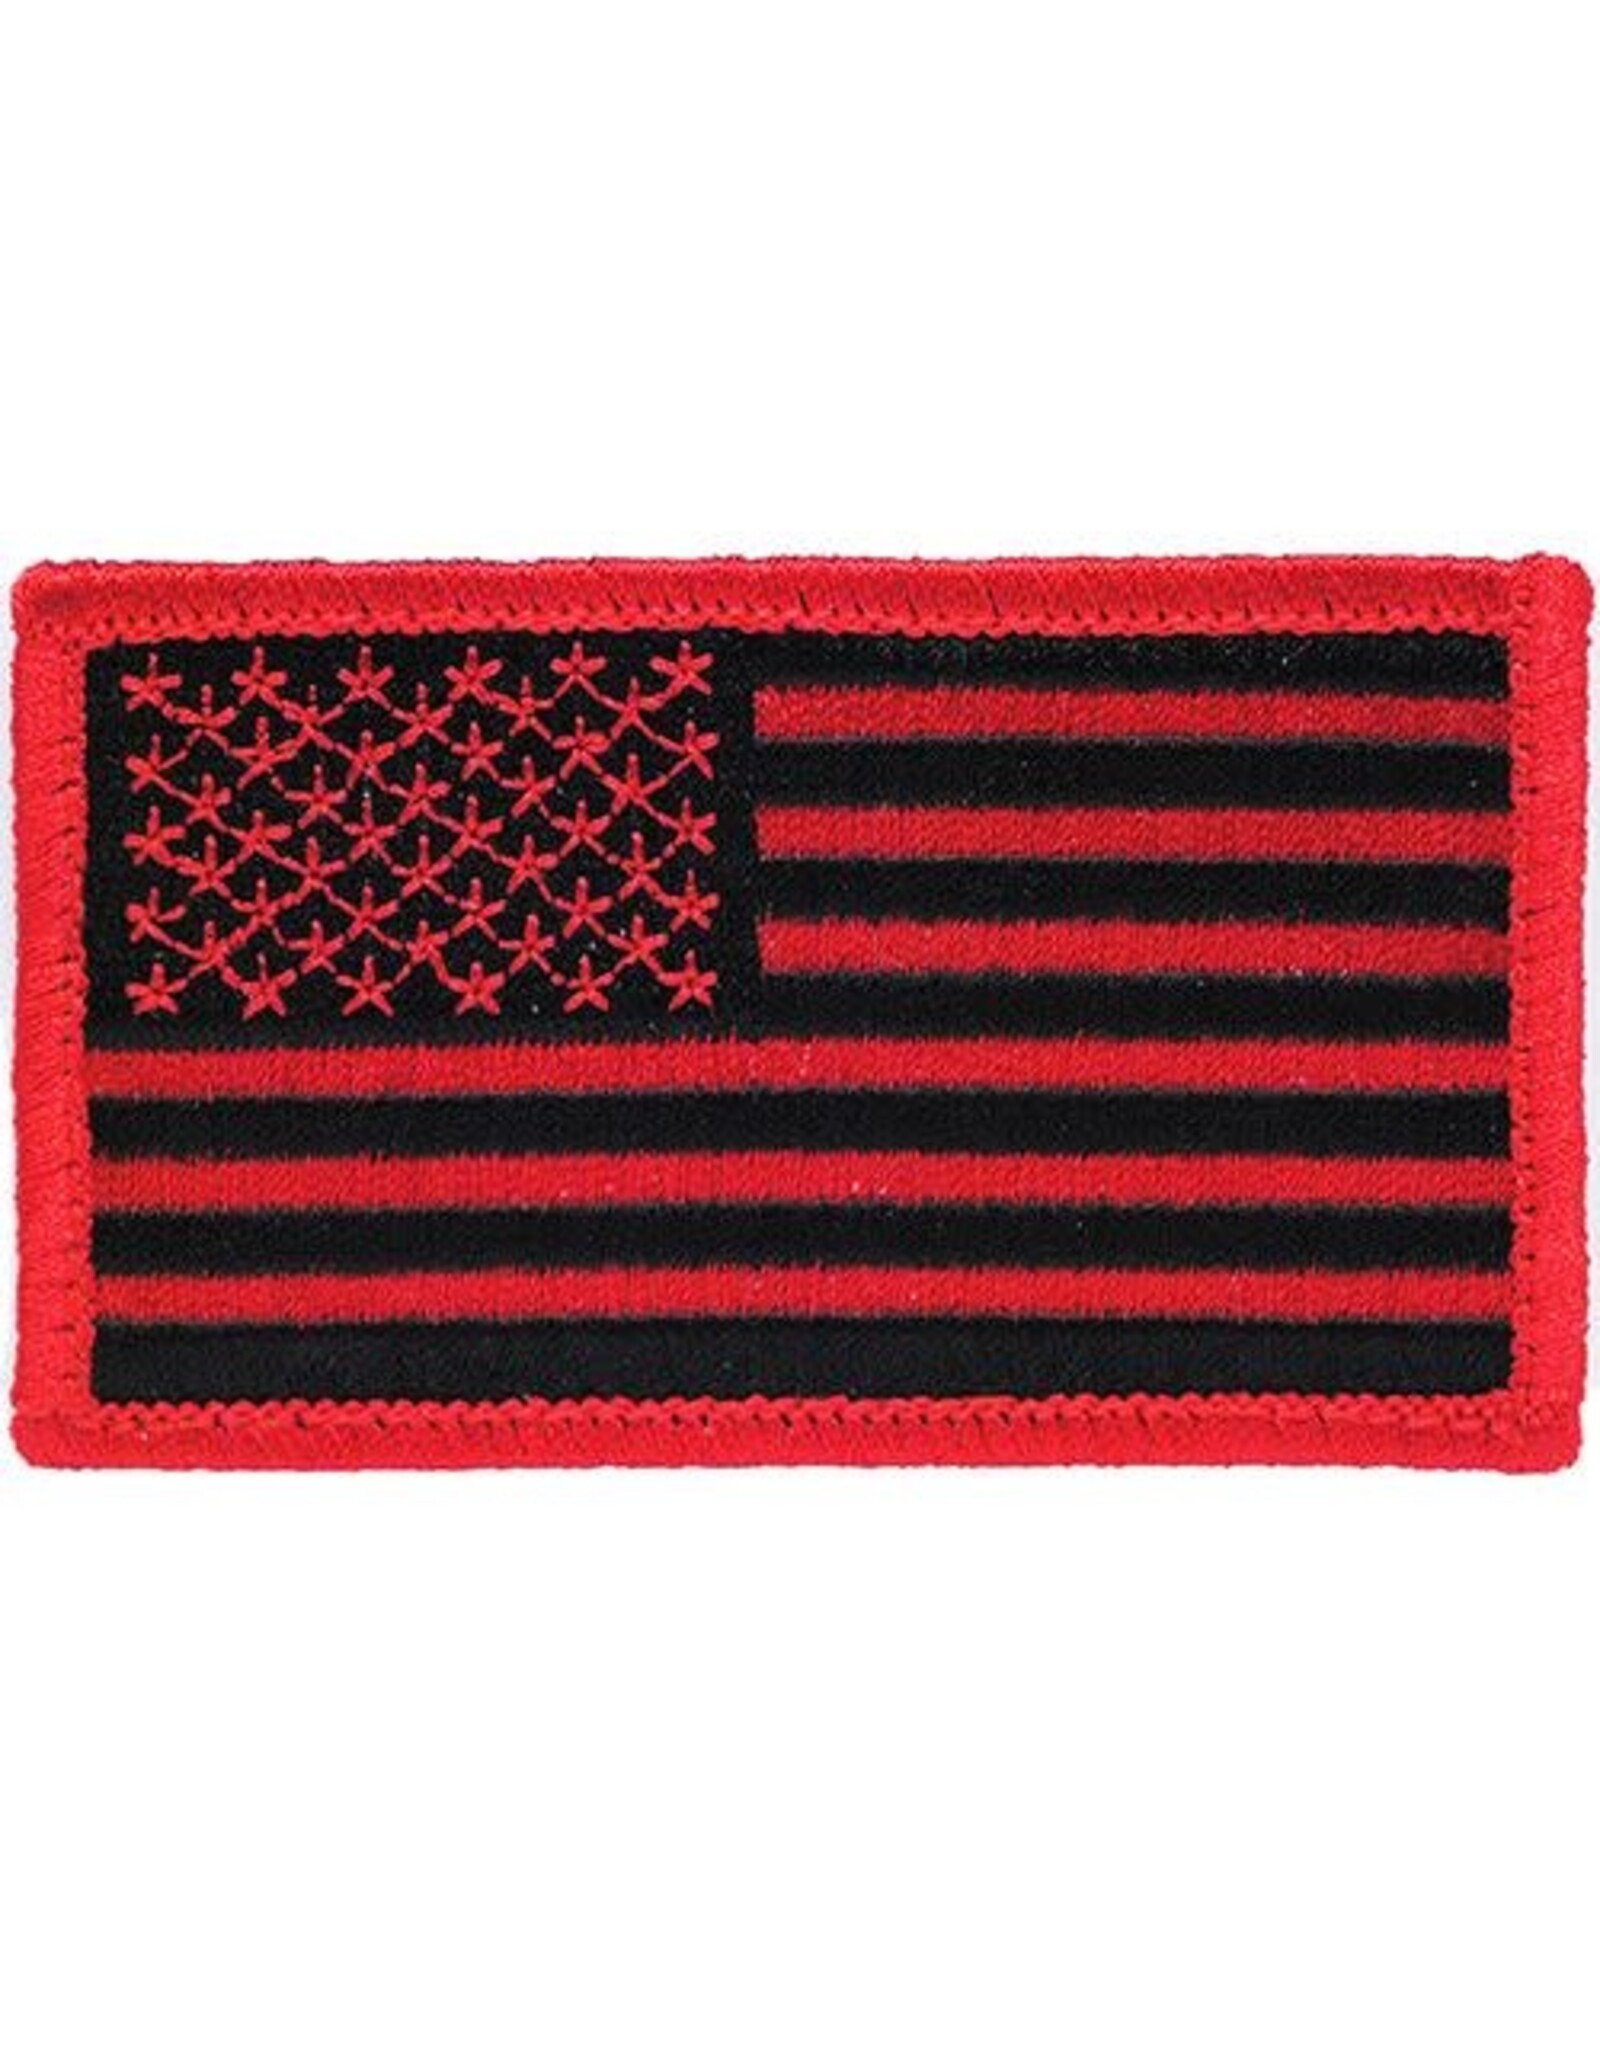 Patch - Flag USA Rectangle Red Black